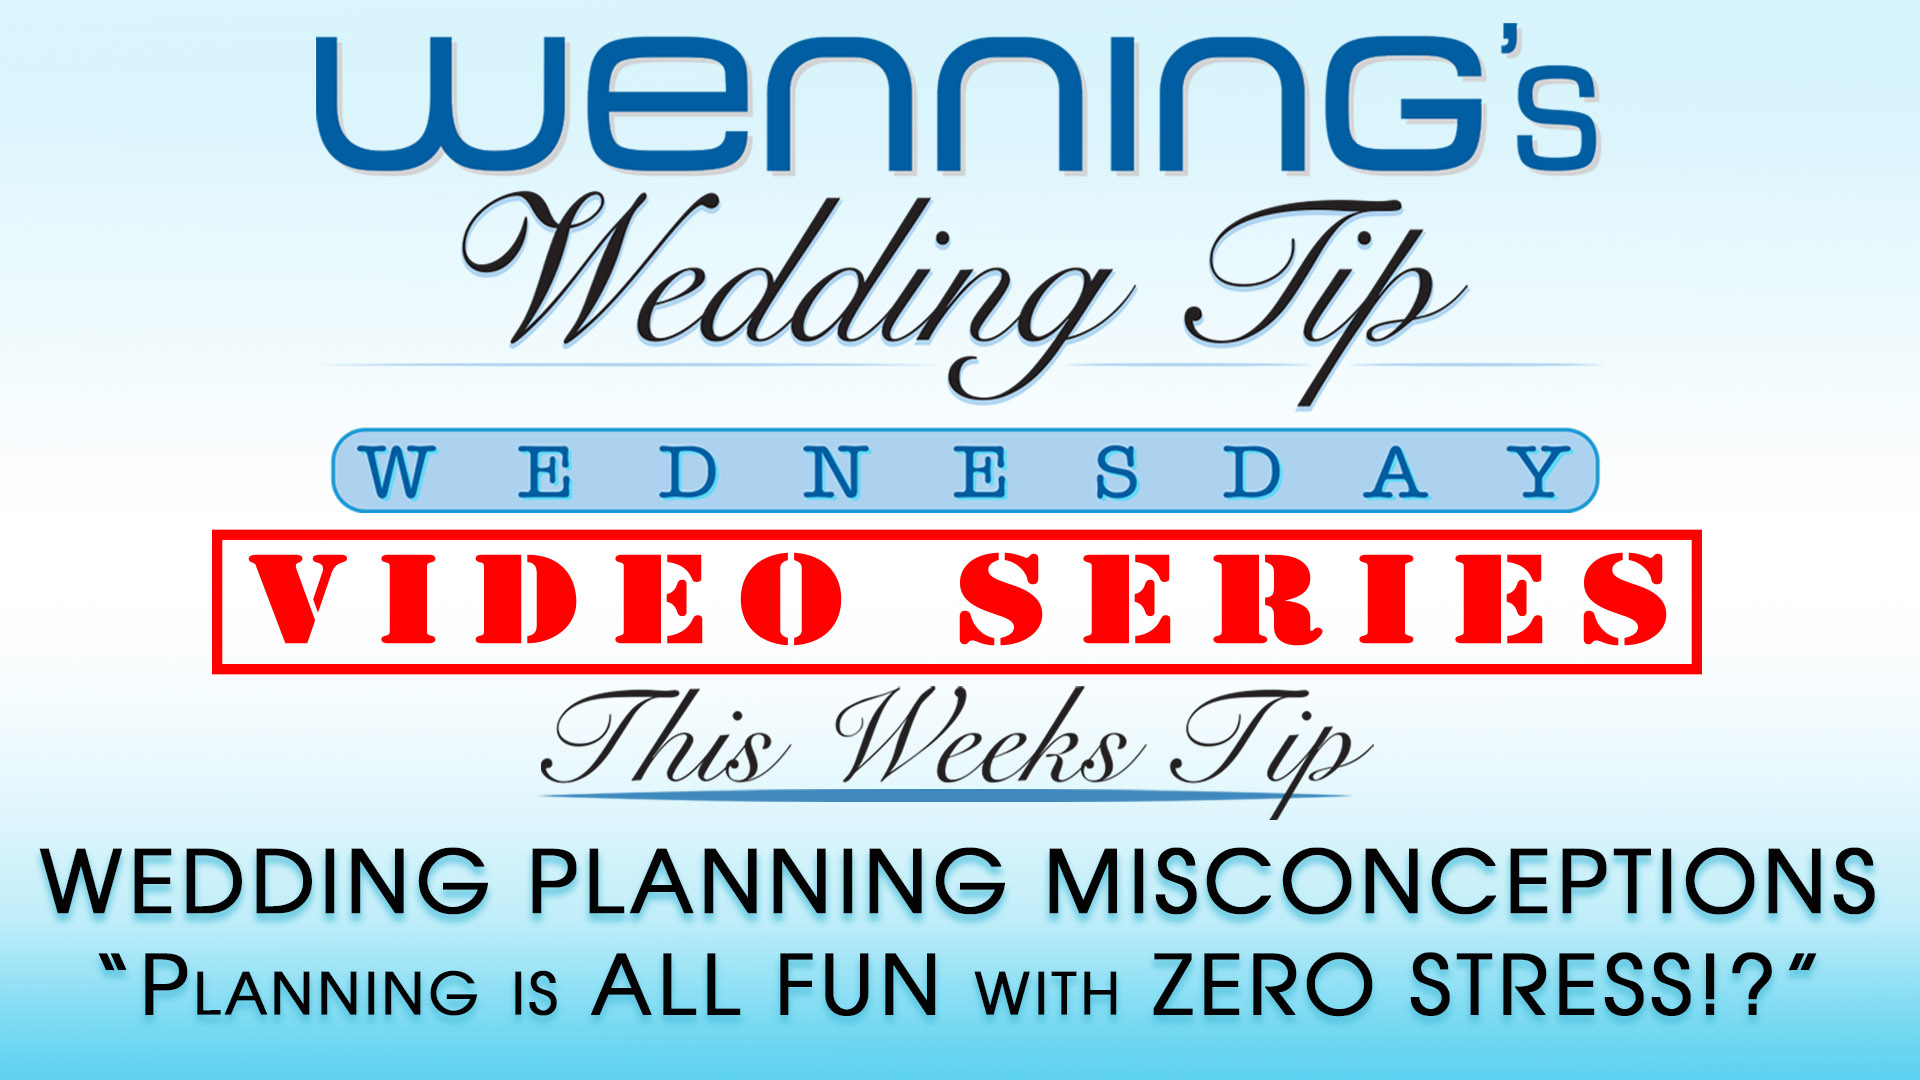 WWTW | Wedding Planning Misconceptions | “Planning is ALL FUN with ZERO STRESS!?”